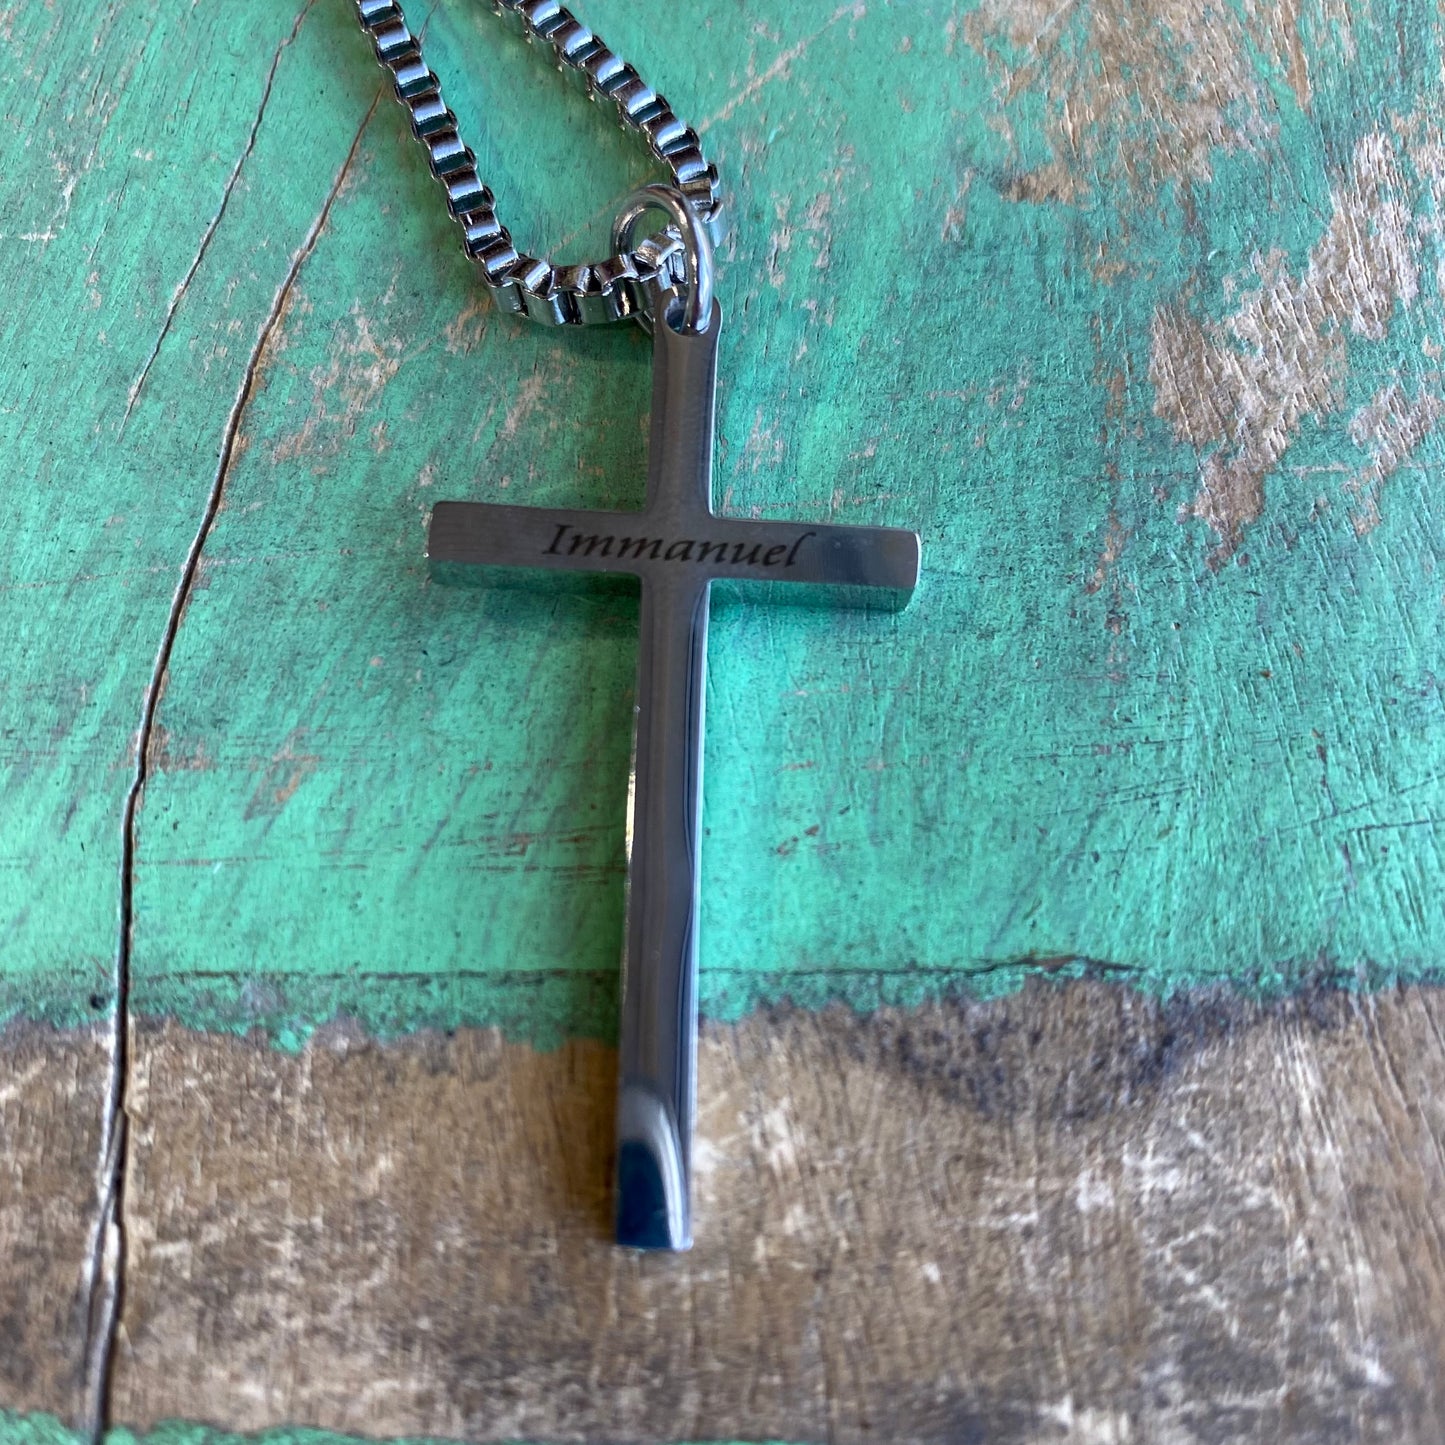 Stainless Steel Immanuel Cross Necklace